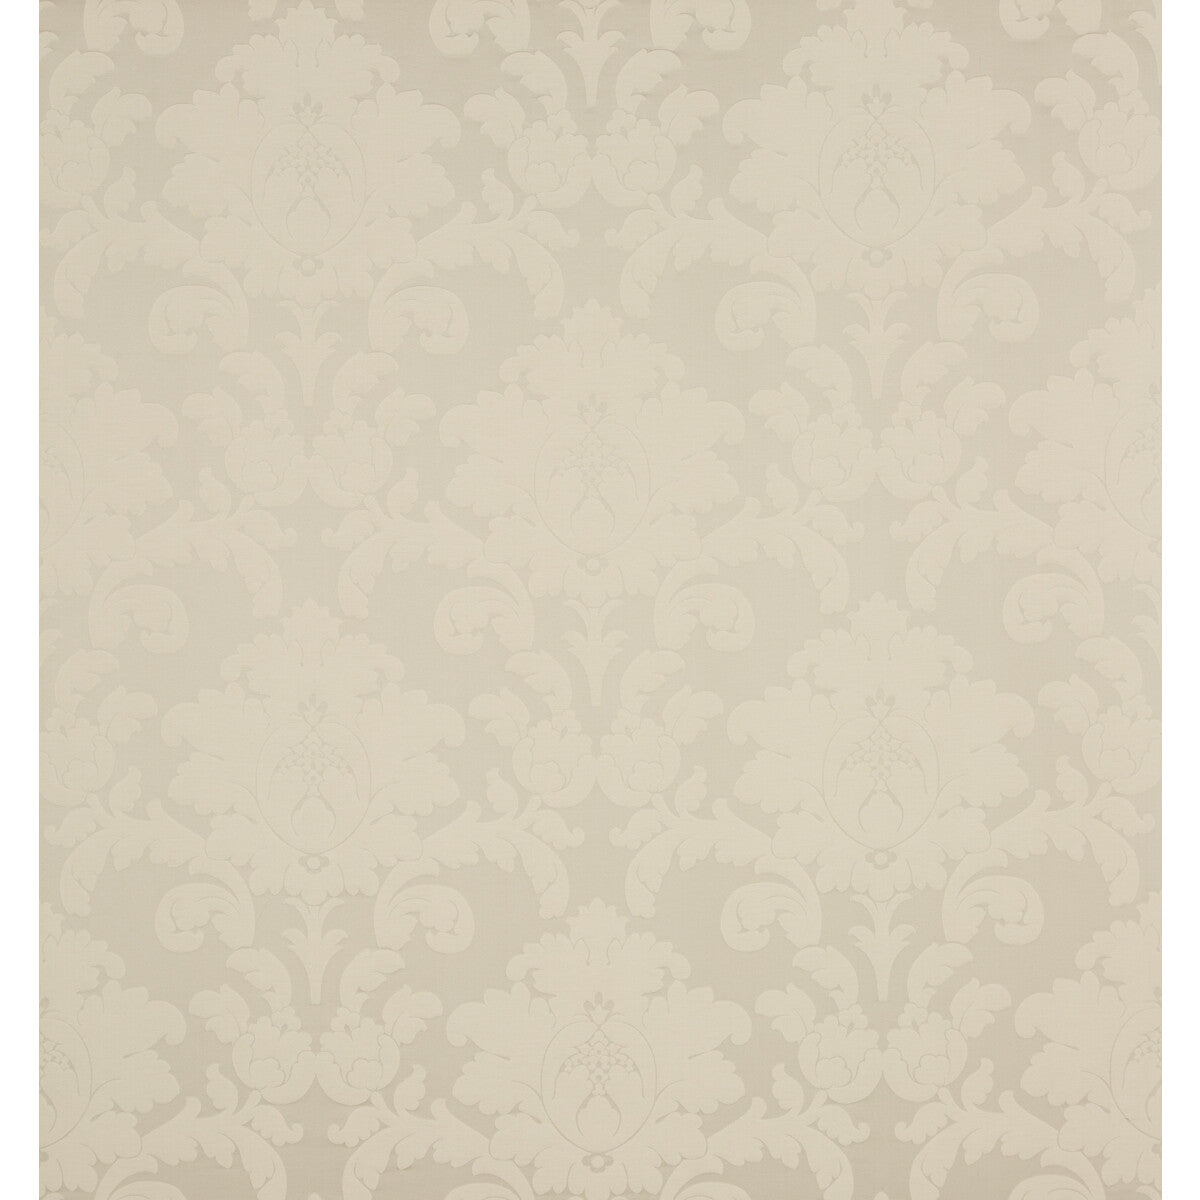 Sylvana fabric in platnium color - pattern 8014117.11.0 - by Brunschwig &amp; Fils in the Maisonnette collection